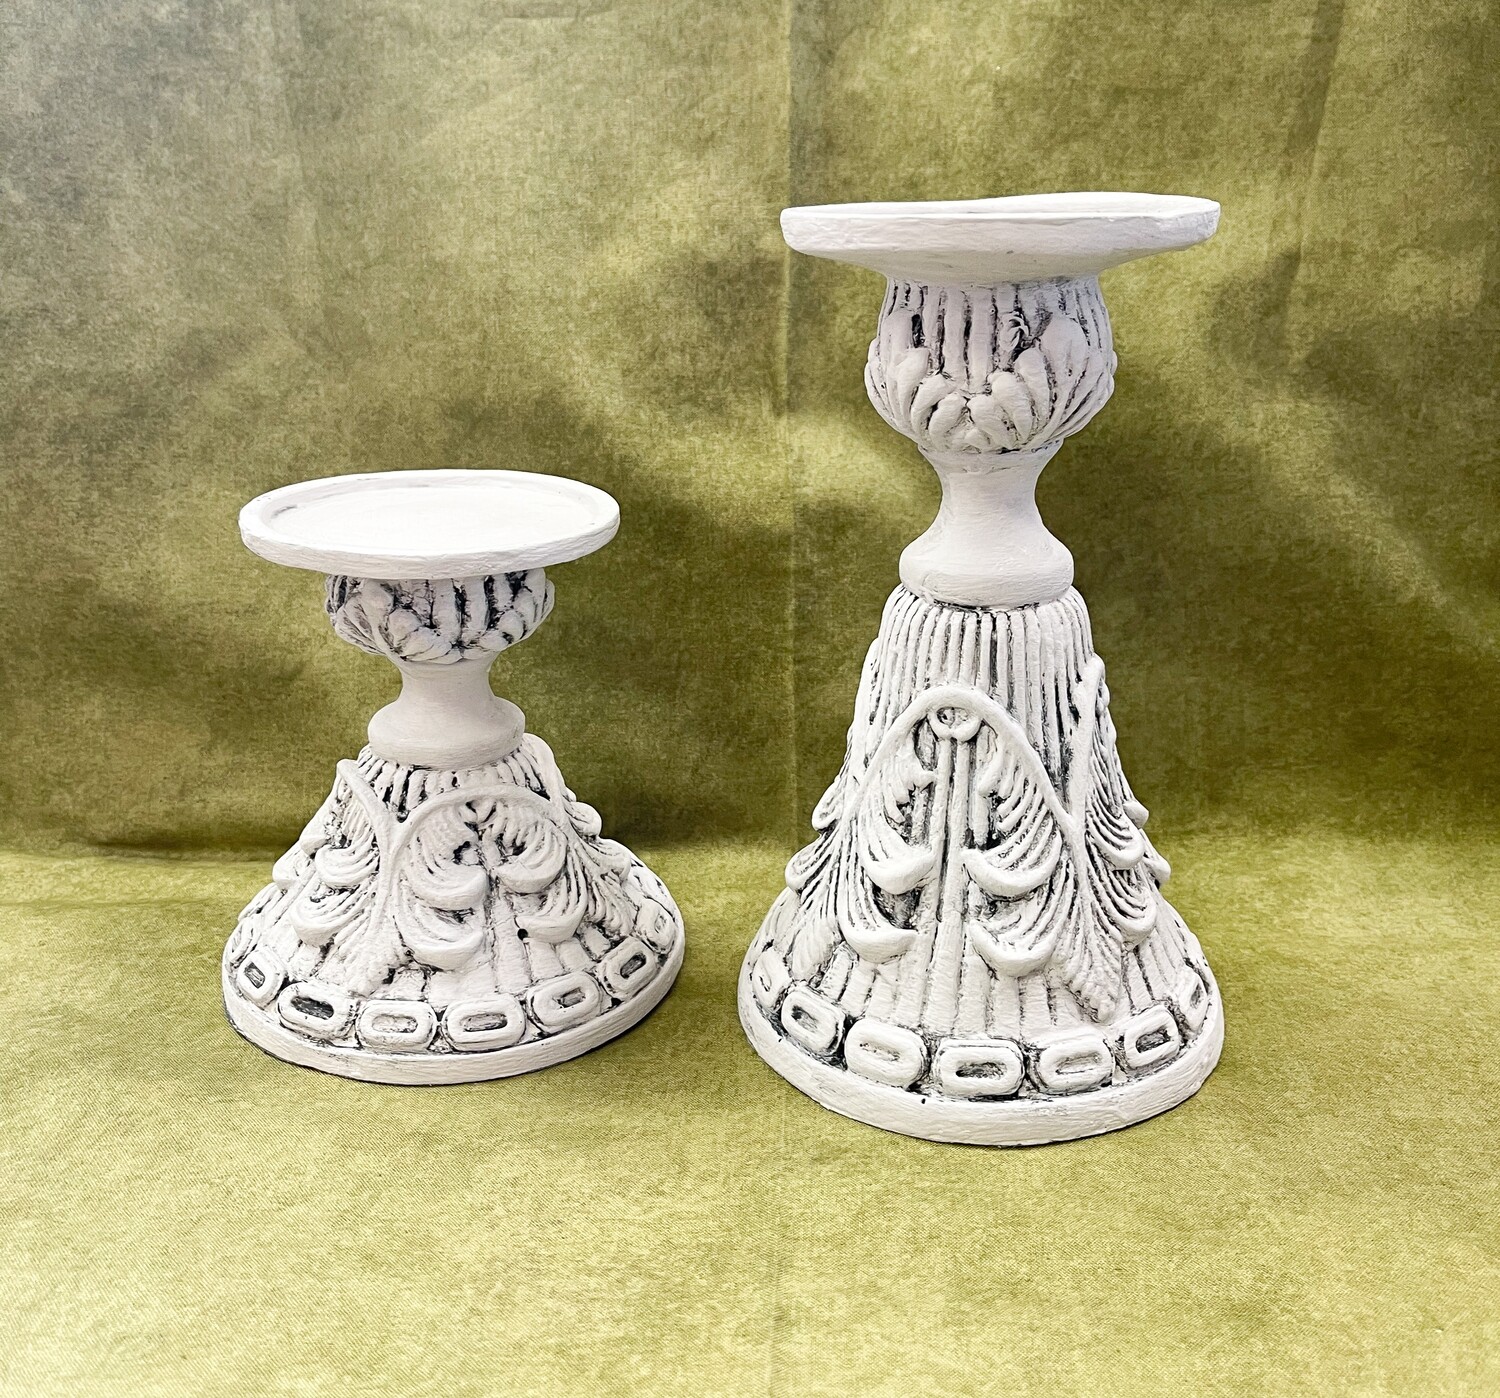 Antiqued Candlestick Holders